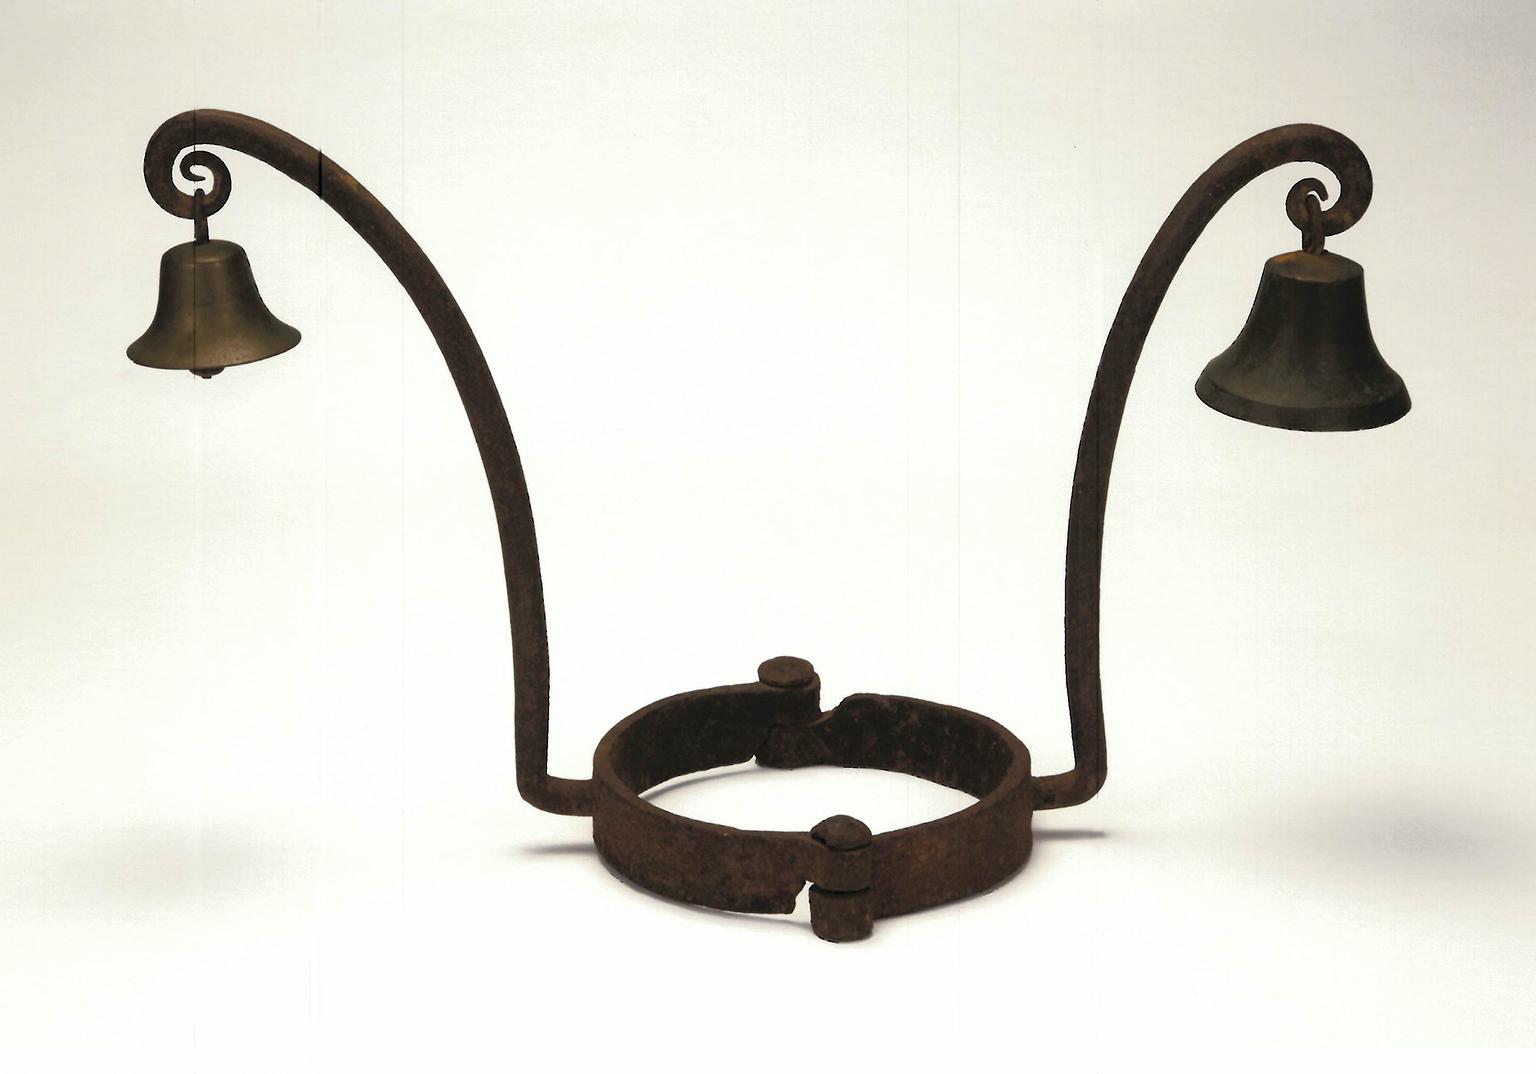 A slave collar with bells, made of iron and brass, from between 1800 and 1865 (Courtesy of the Holden Family Collection)